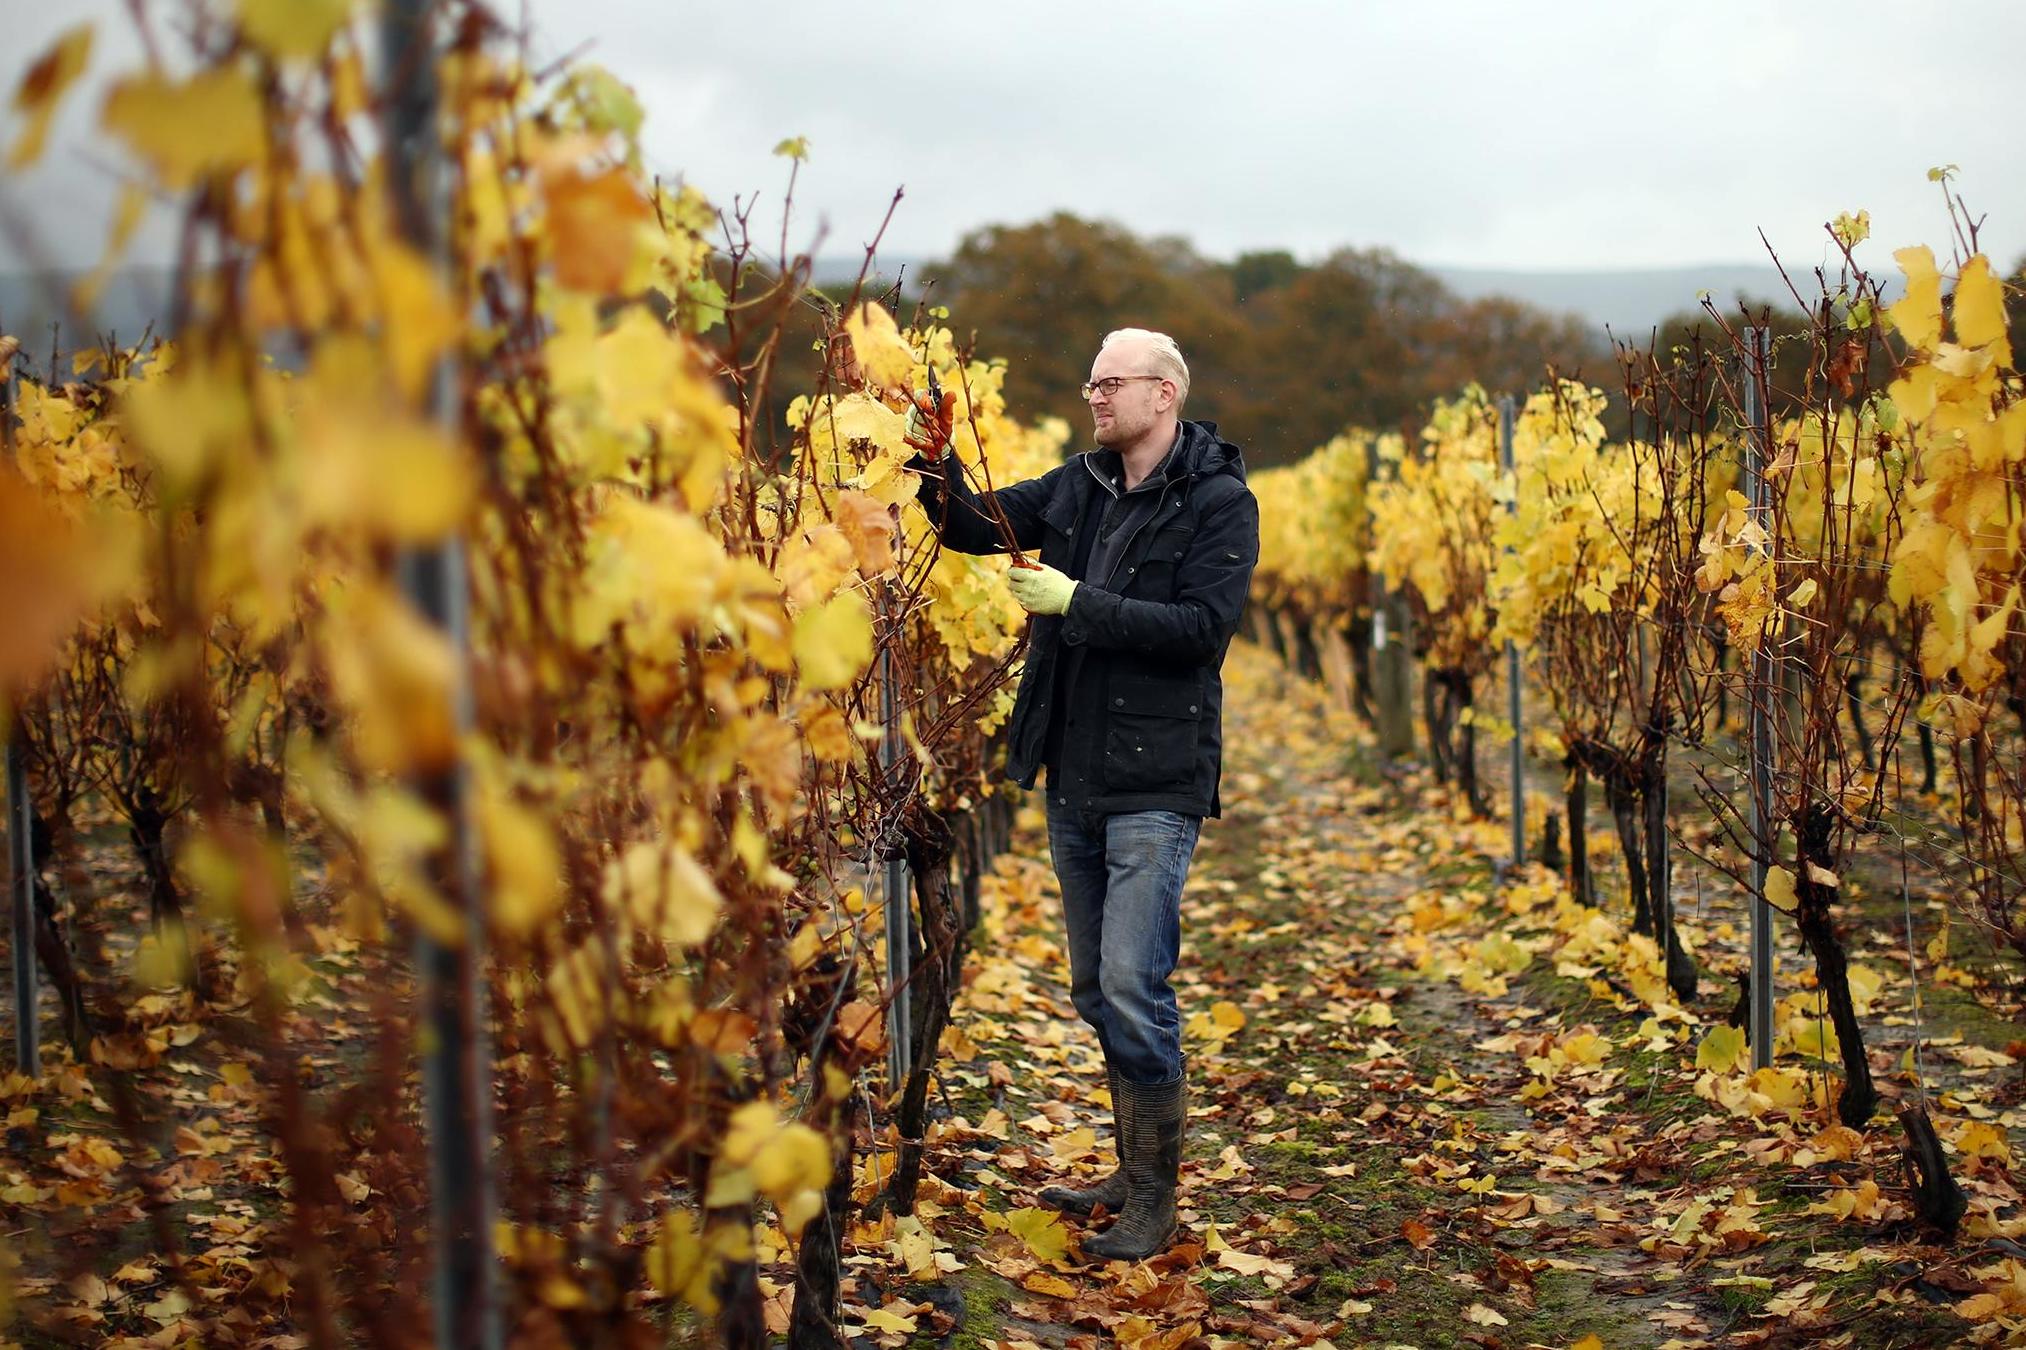 Although not traditionally viewed as serious competitor to more established wine-growing regions, English wine has become a major growth industry in recent years